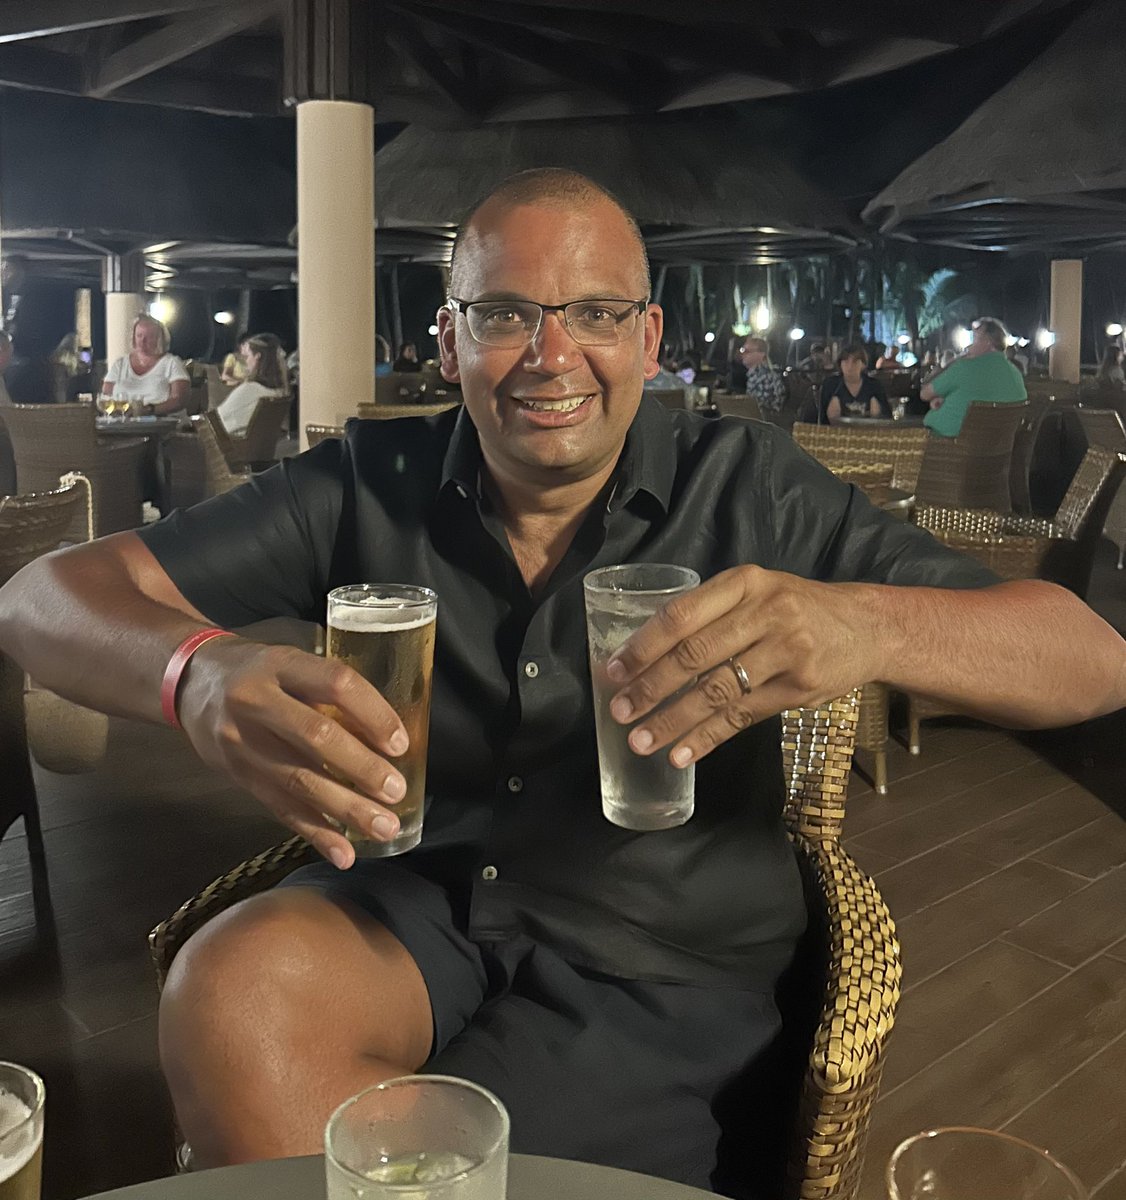 We’re the Forest boys making all the noise…..everywhere we go!!! What a f’kin win!! 3 sweet goals. Sooo many positives.  Let’s f’kin go!! Getting twatted tonight! #capeverde #nffc #forestonholiday